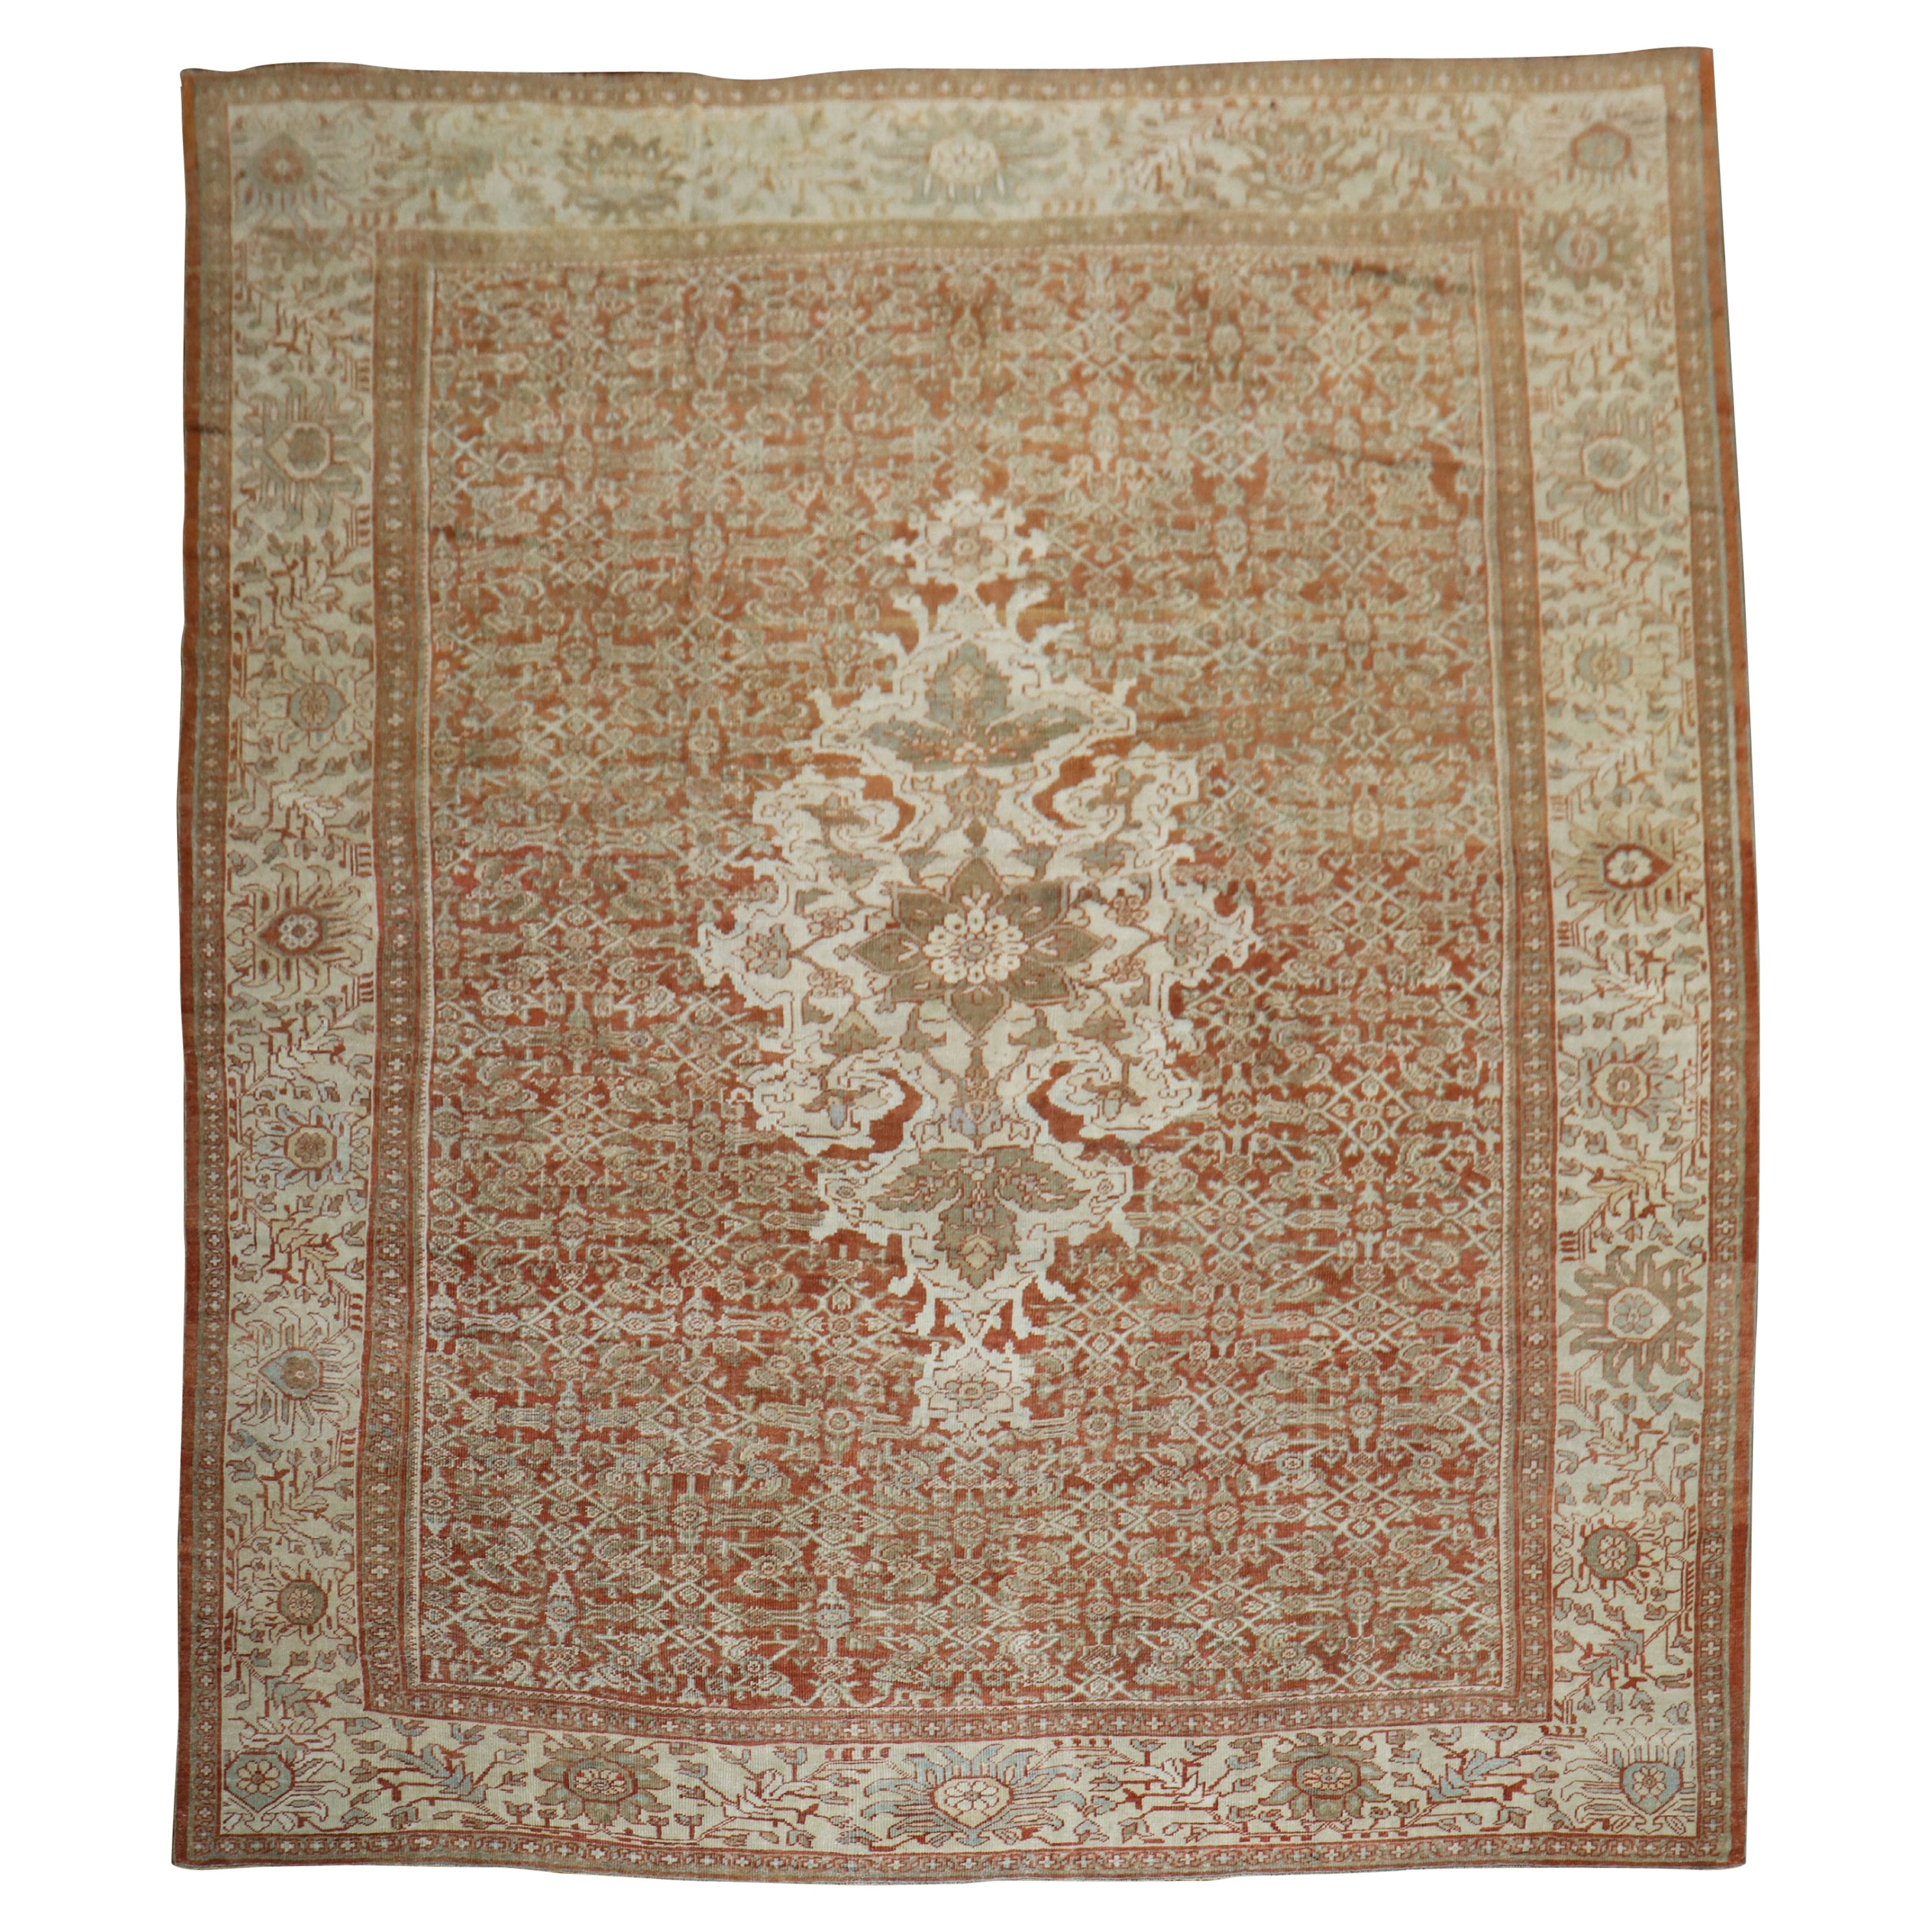 Oversize Square Antique Persian Mahal Sultanabad Rug